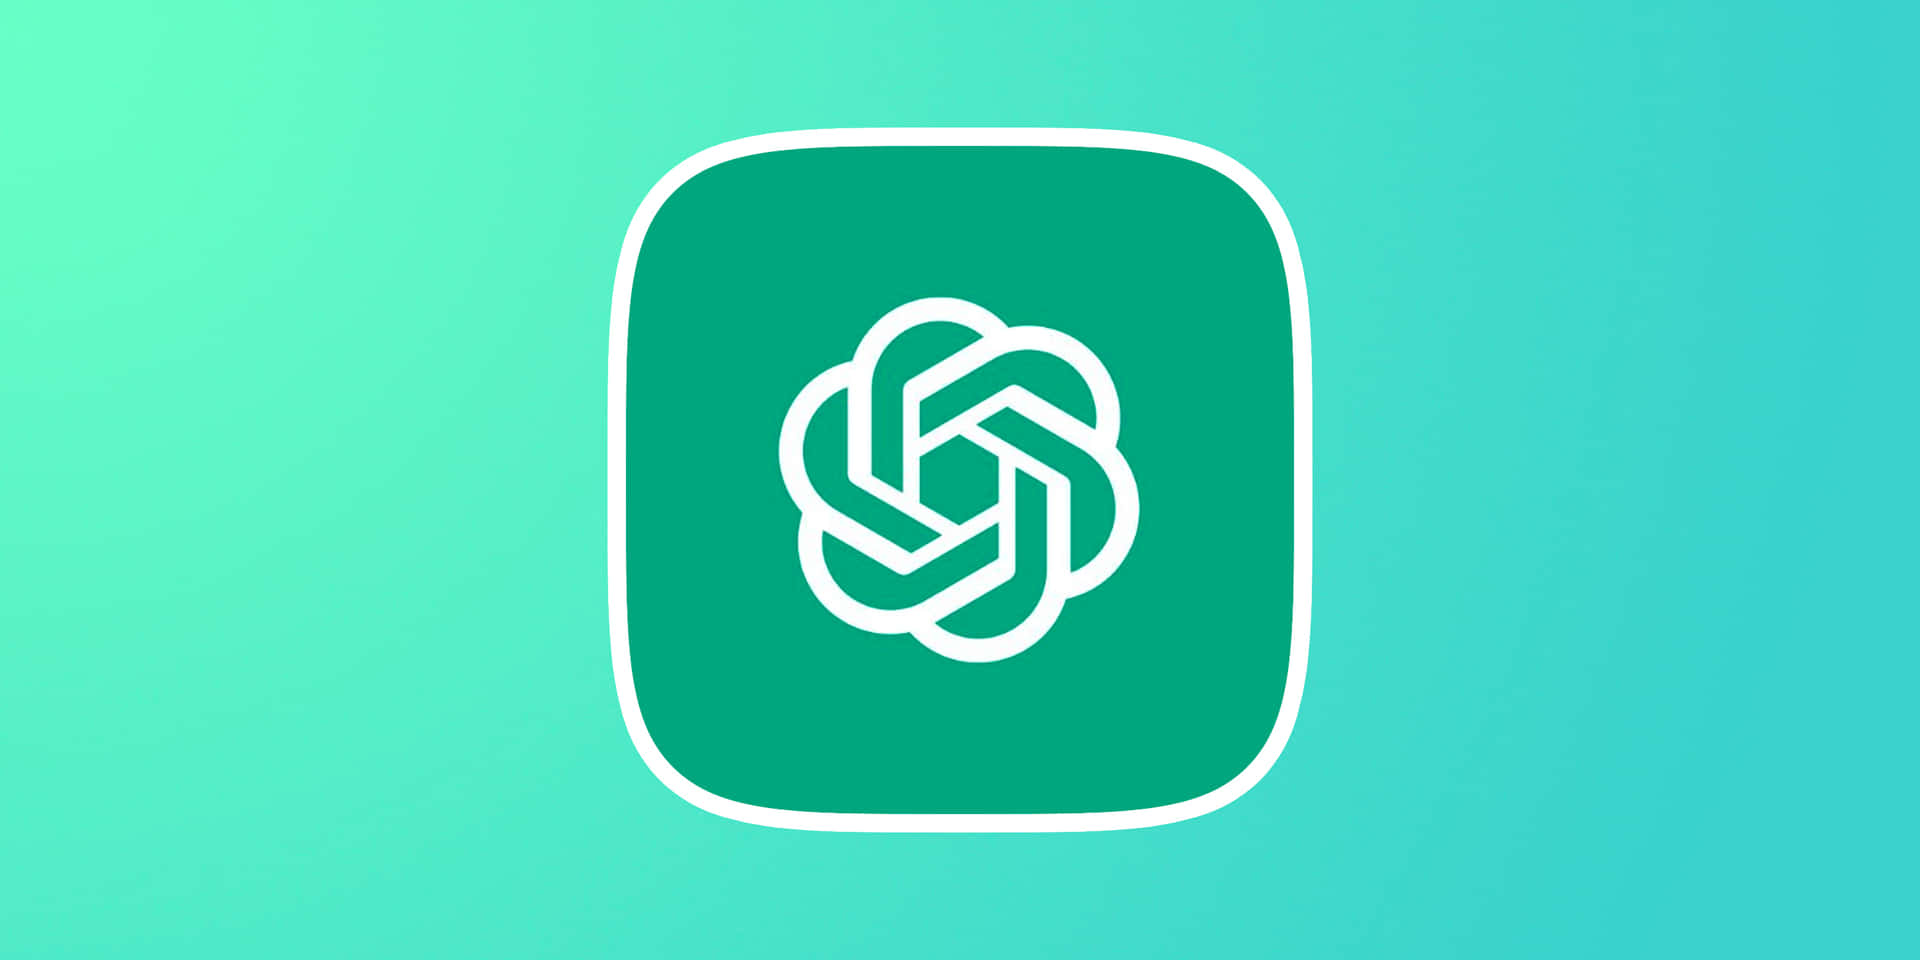 A Green And White Logo With A Knot On It Wallpaper